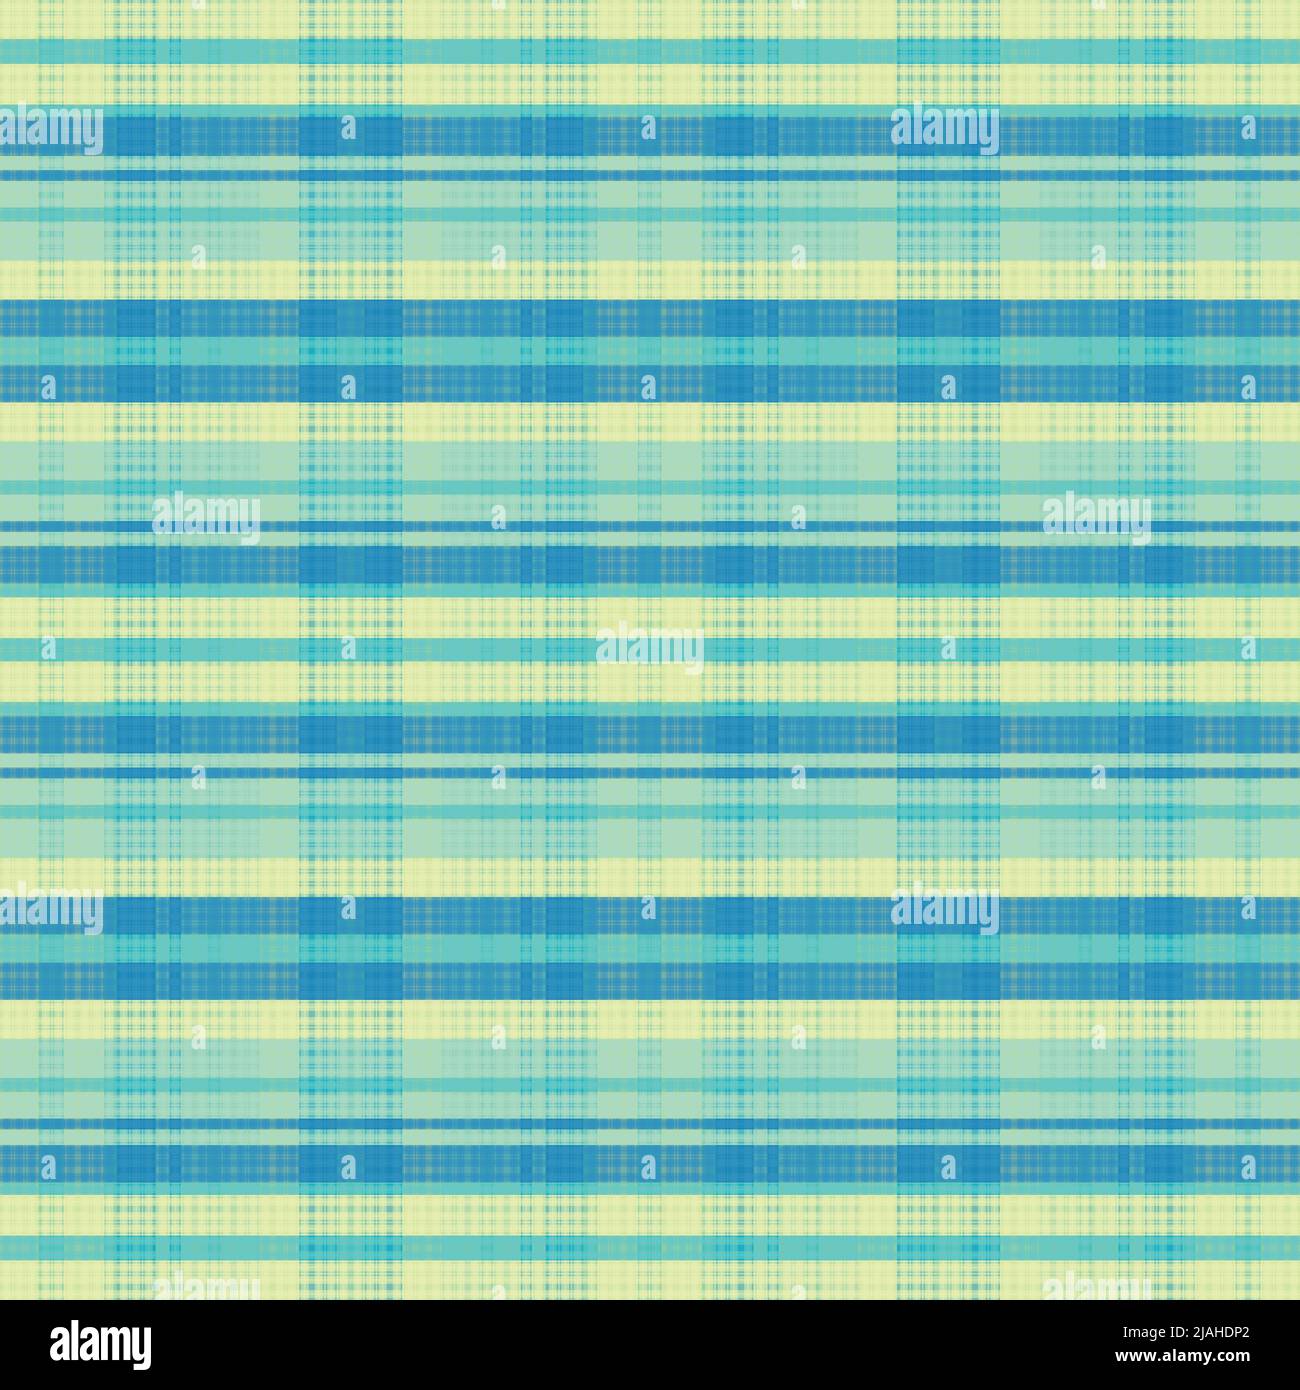 Tartan plaid pattern with texture and summer color. Vector illustration ...